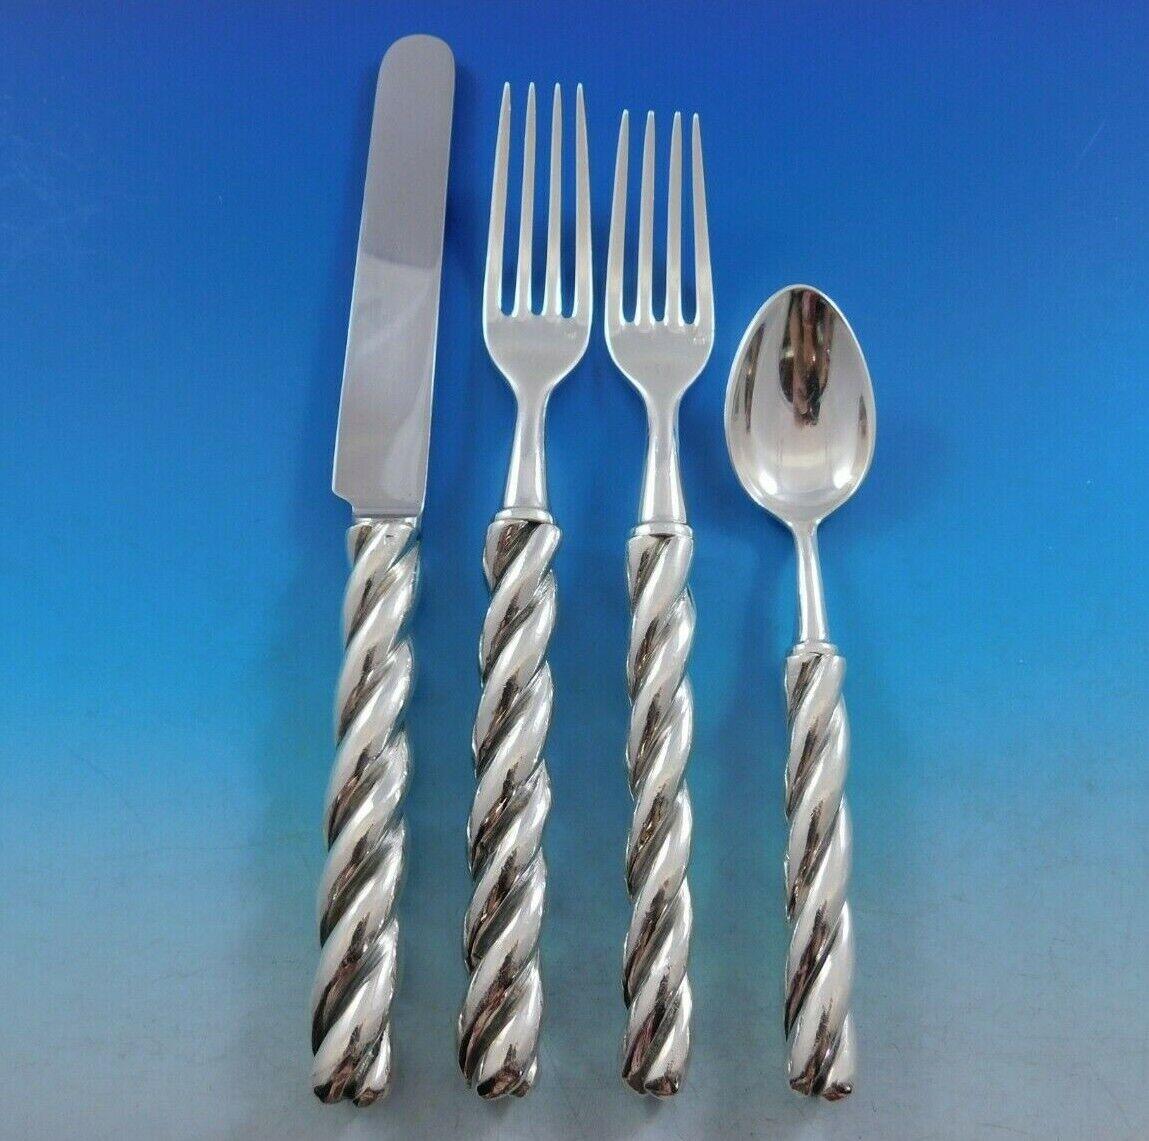 Fabulous rope by Roux-Marquiand French estate Silverplated Flatware set - 84 pieces. This set features a three-dimensional twist rope-style handle and includes:

12 Dinner Knives, 9 1/4